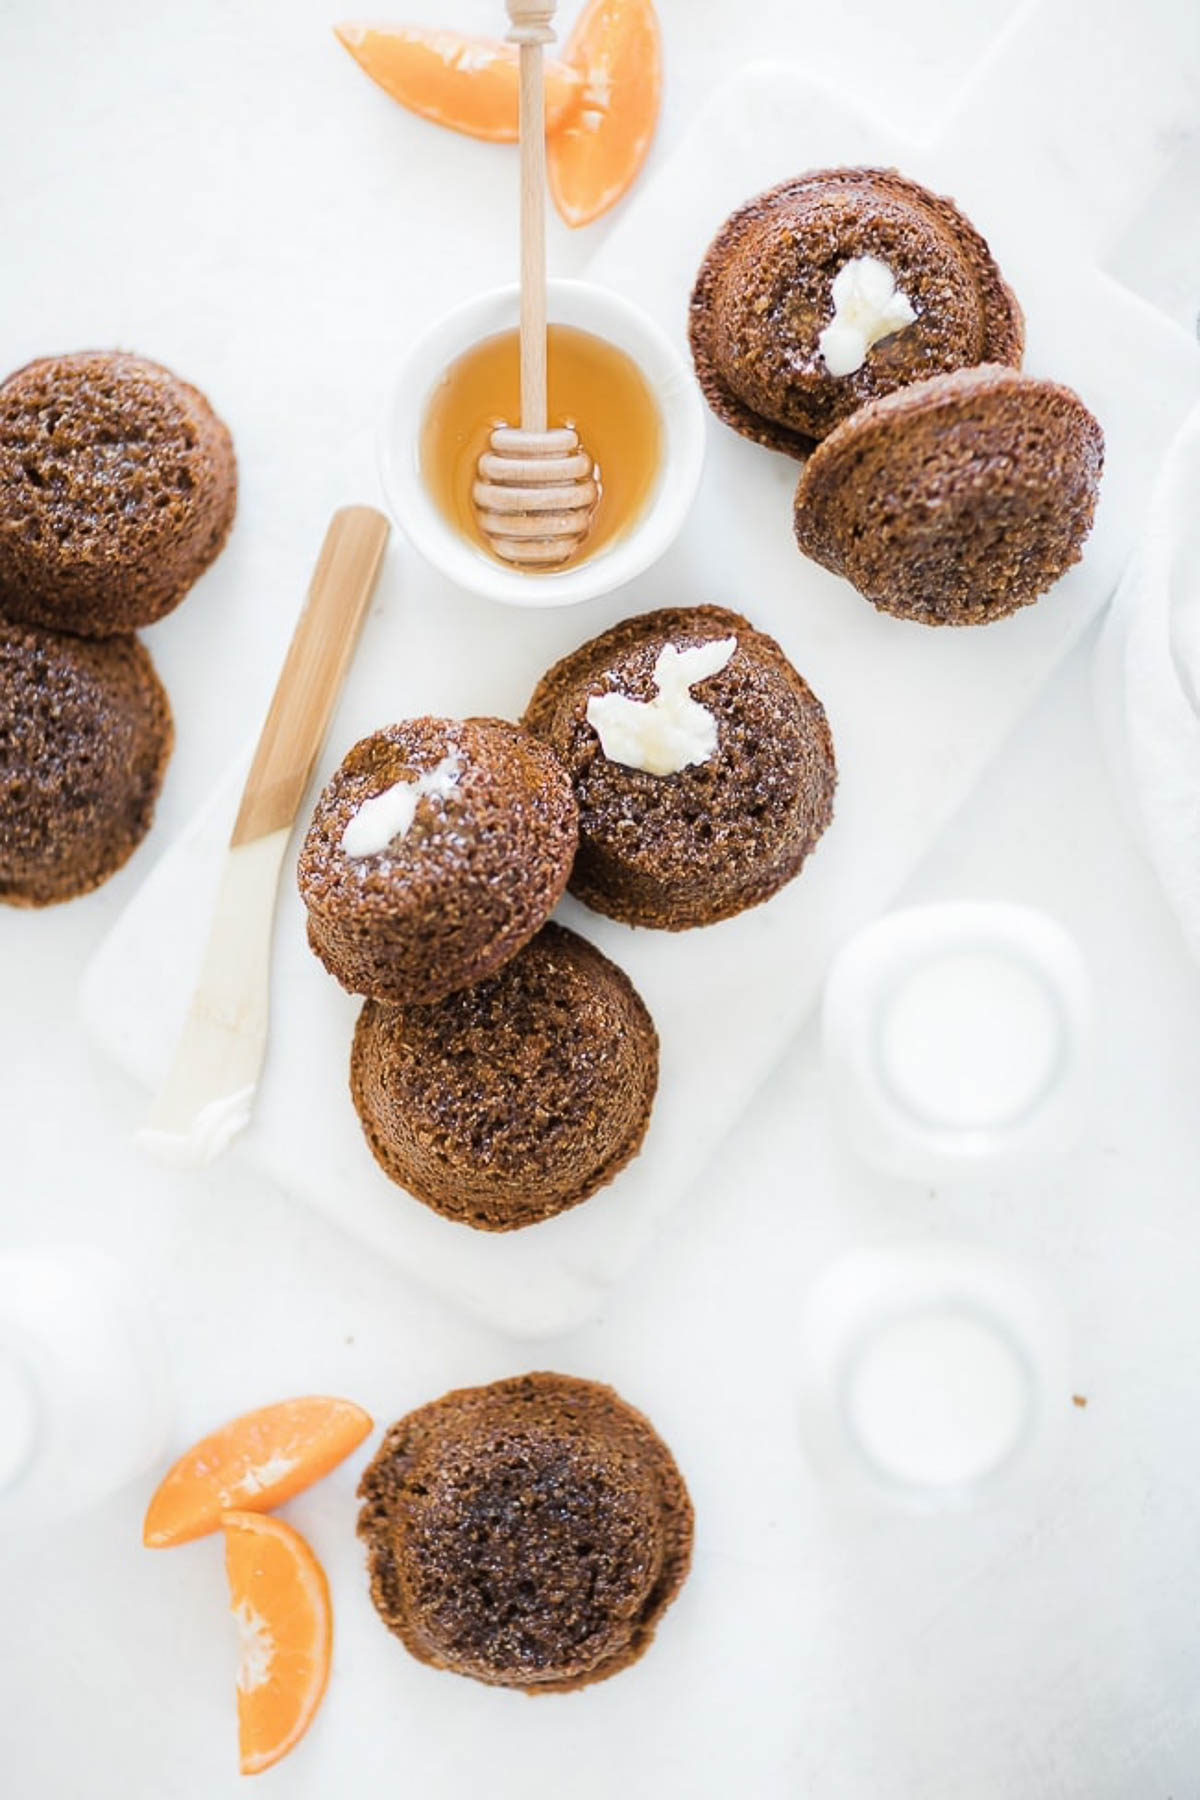 Molasses bran muffins on a table with oranges and jars of milk.